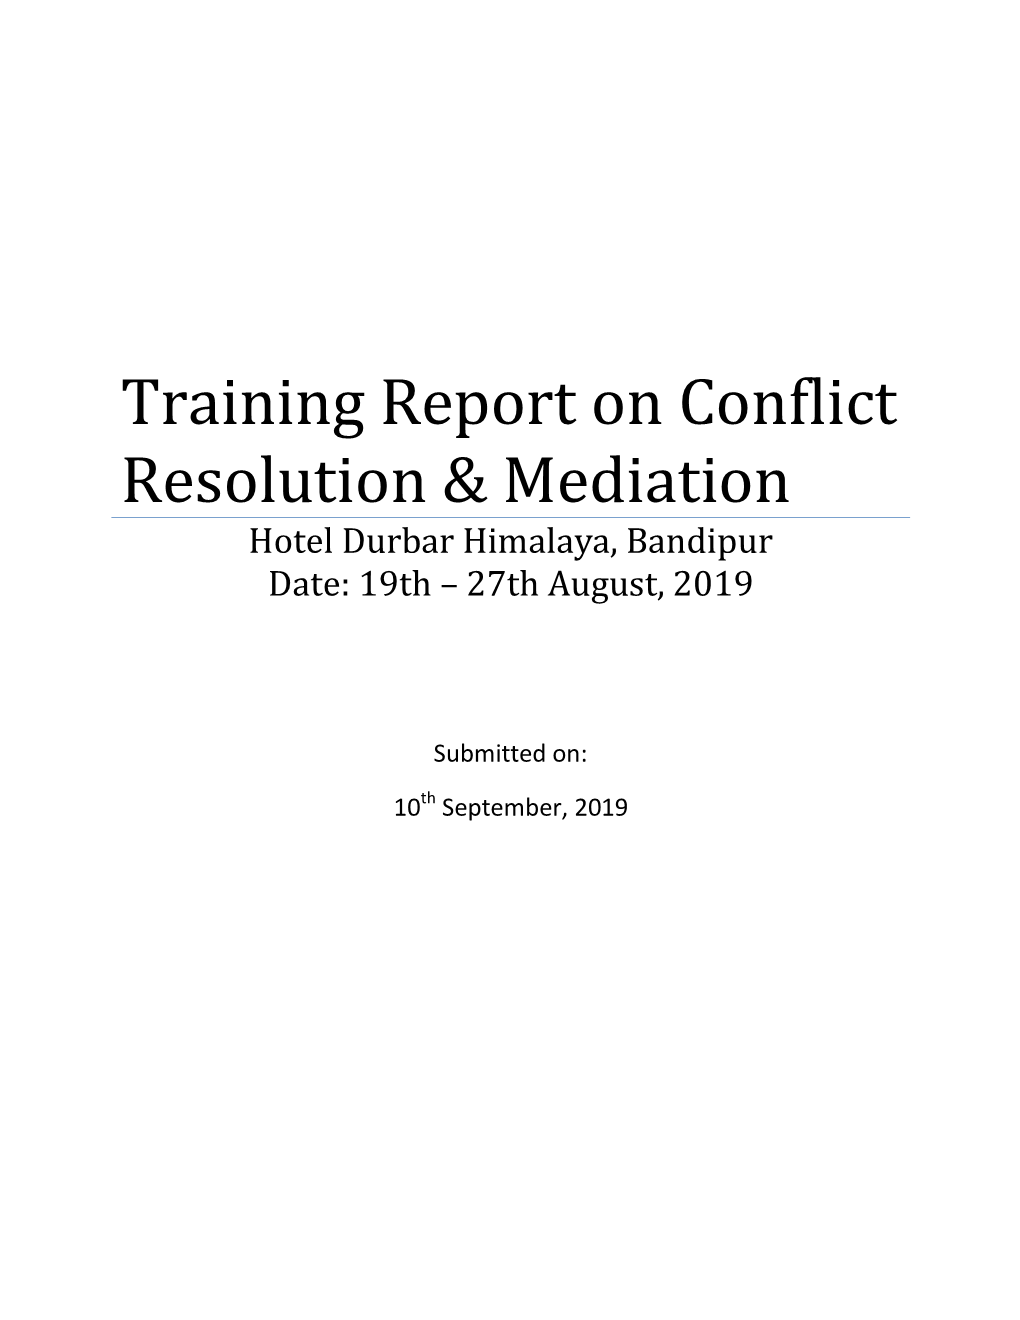 Training Report on Conflict Resolution & Mediation